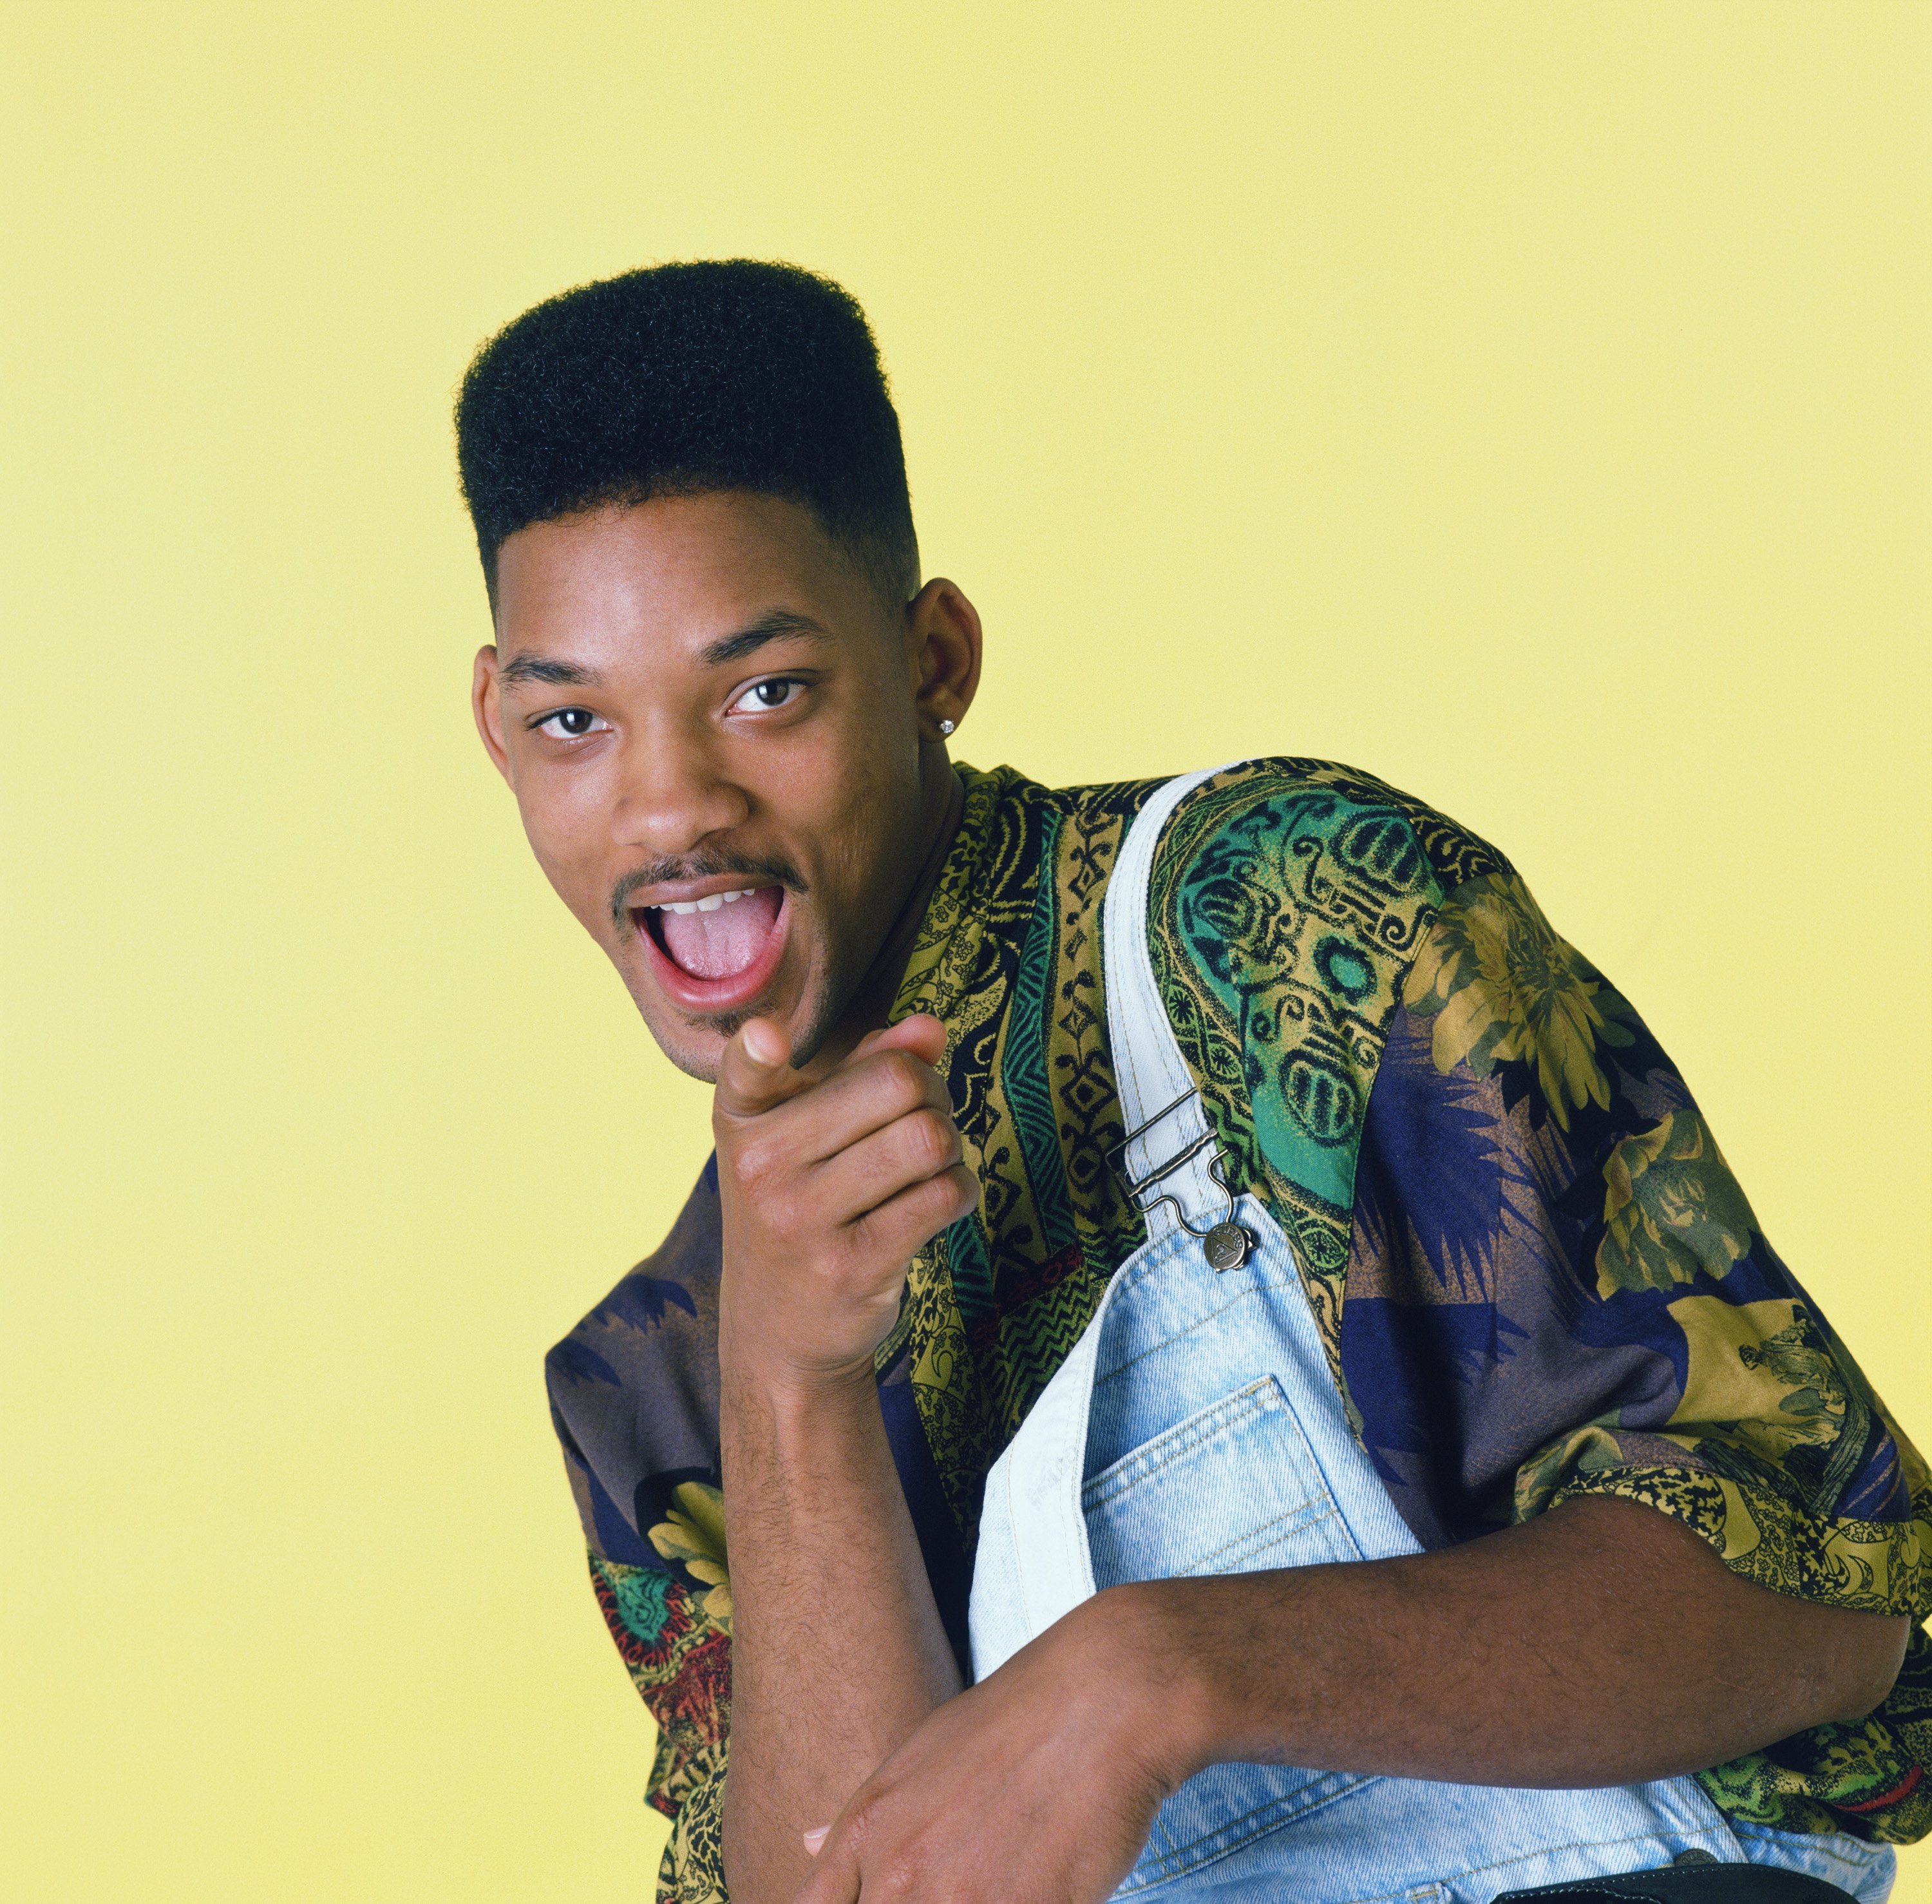 Will Smith in front of a yellow background